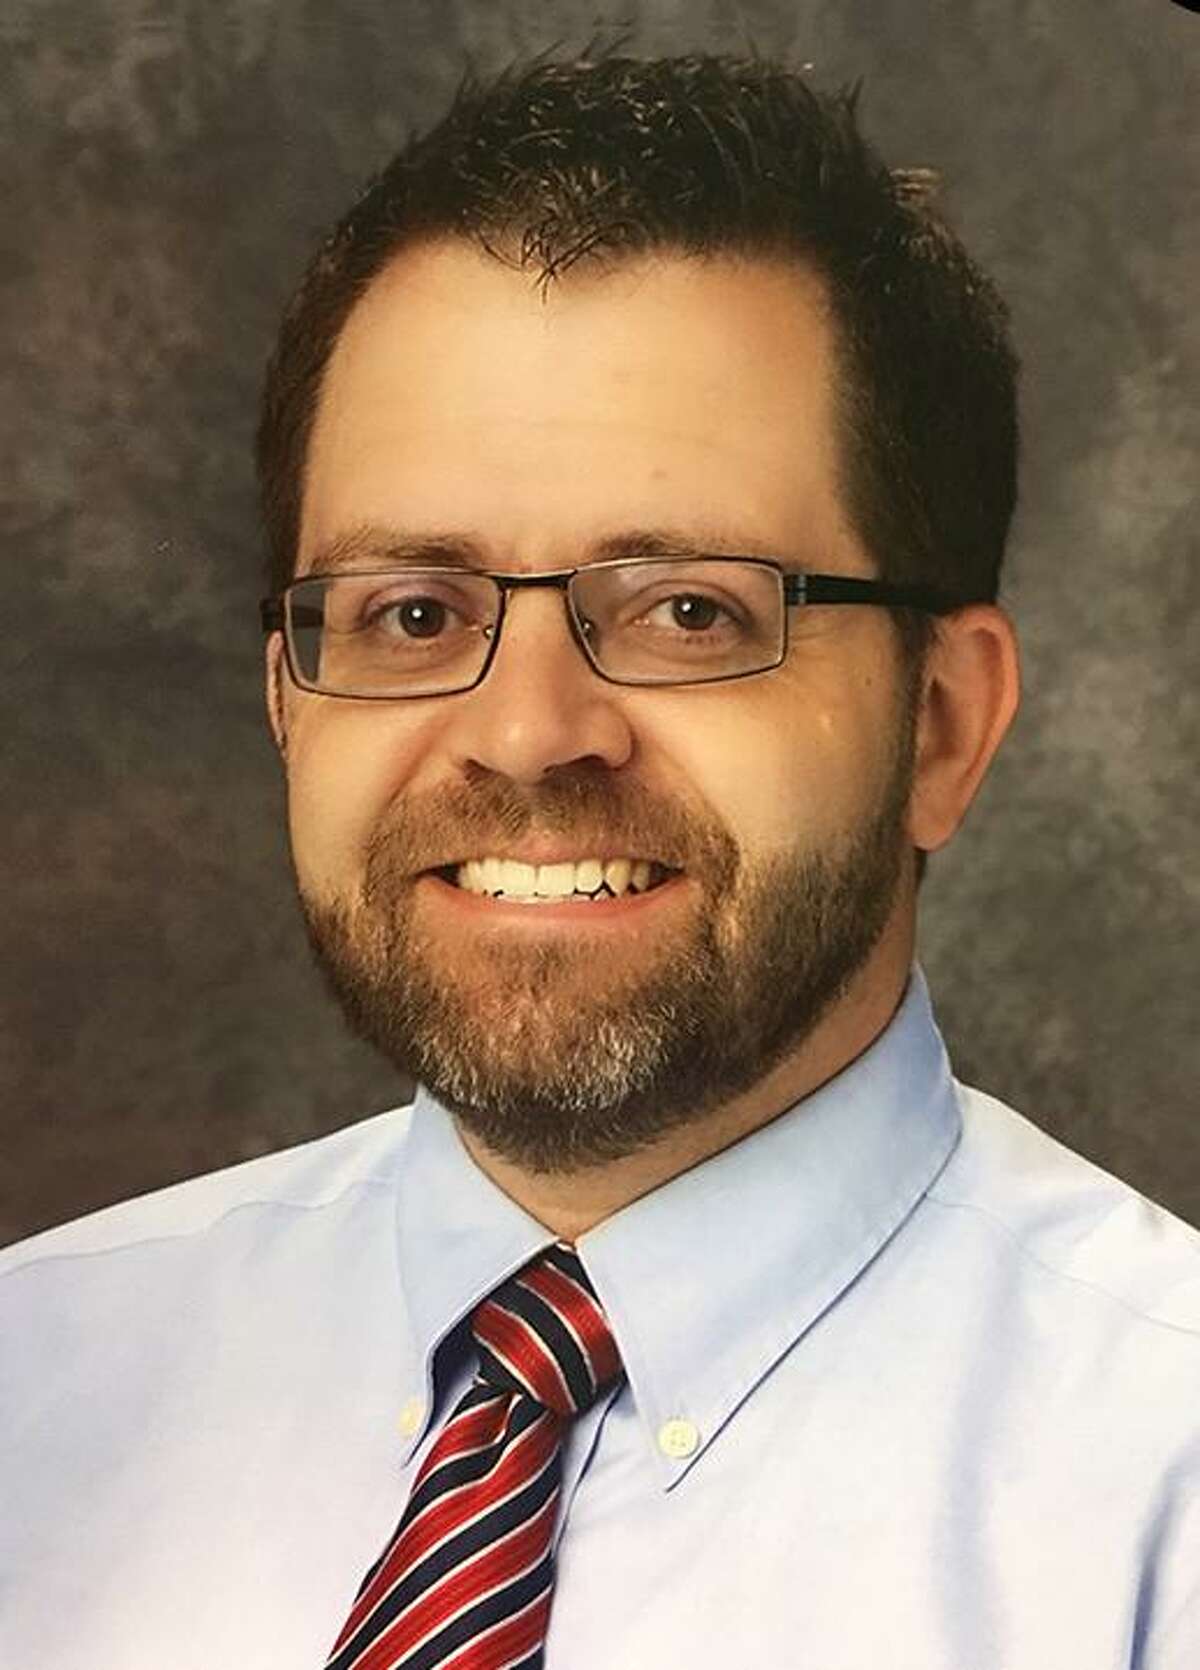 Longtime Danbury High School teacher Sterling Miller has been named “Teacher of the Year” by the Connecticut Technology Engineering Education Association.